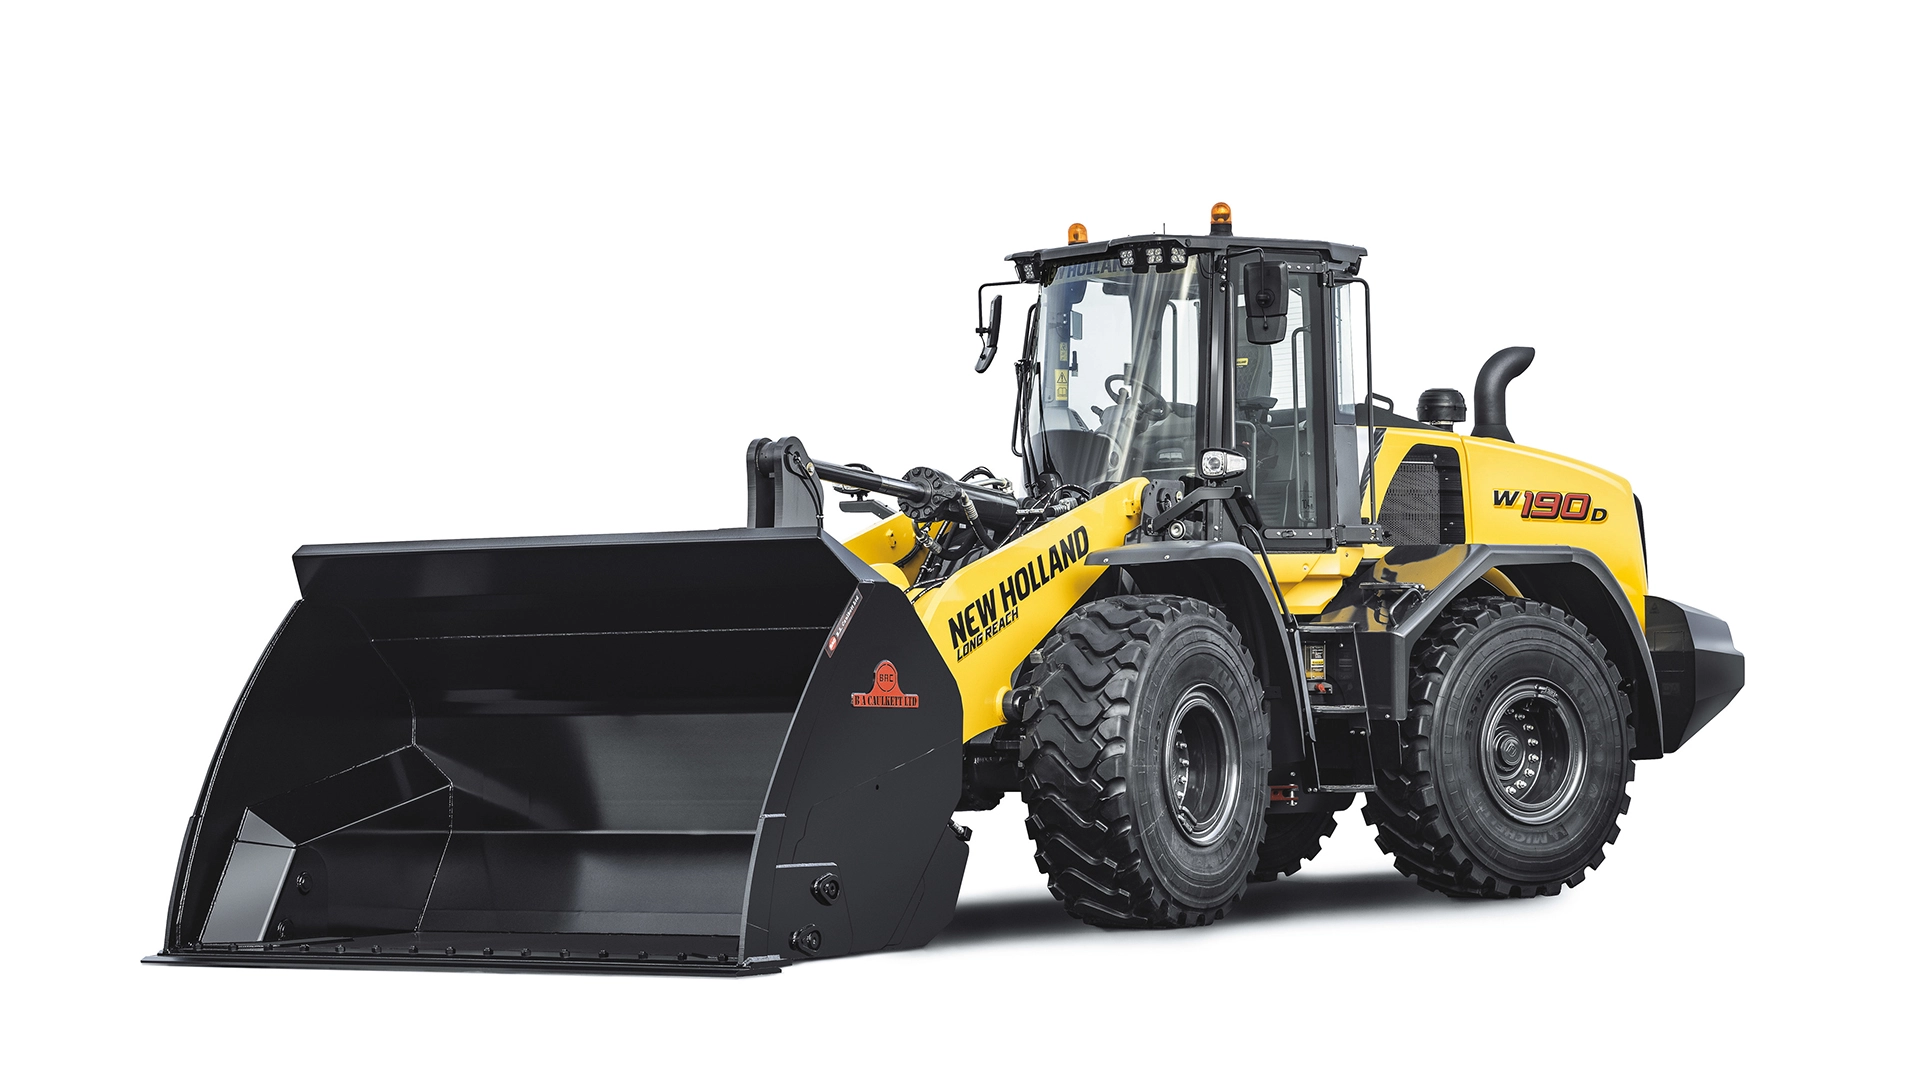 New Holland W190D wheel loader with a large black bucket, highlighted against a white background, symbolizing robust construction and heavy-duty material handling.